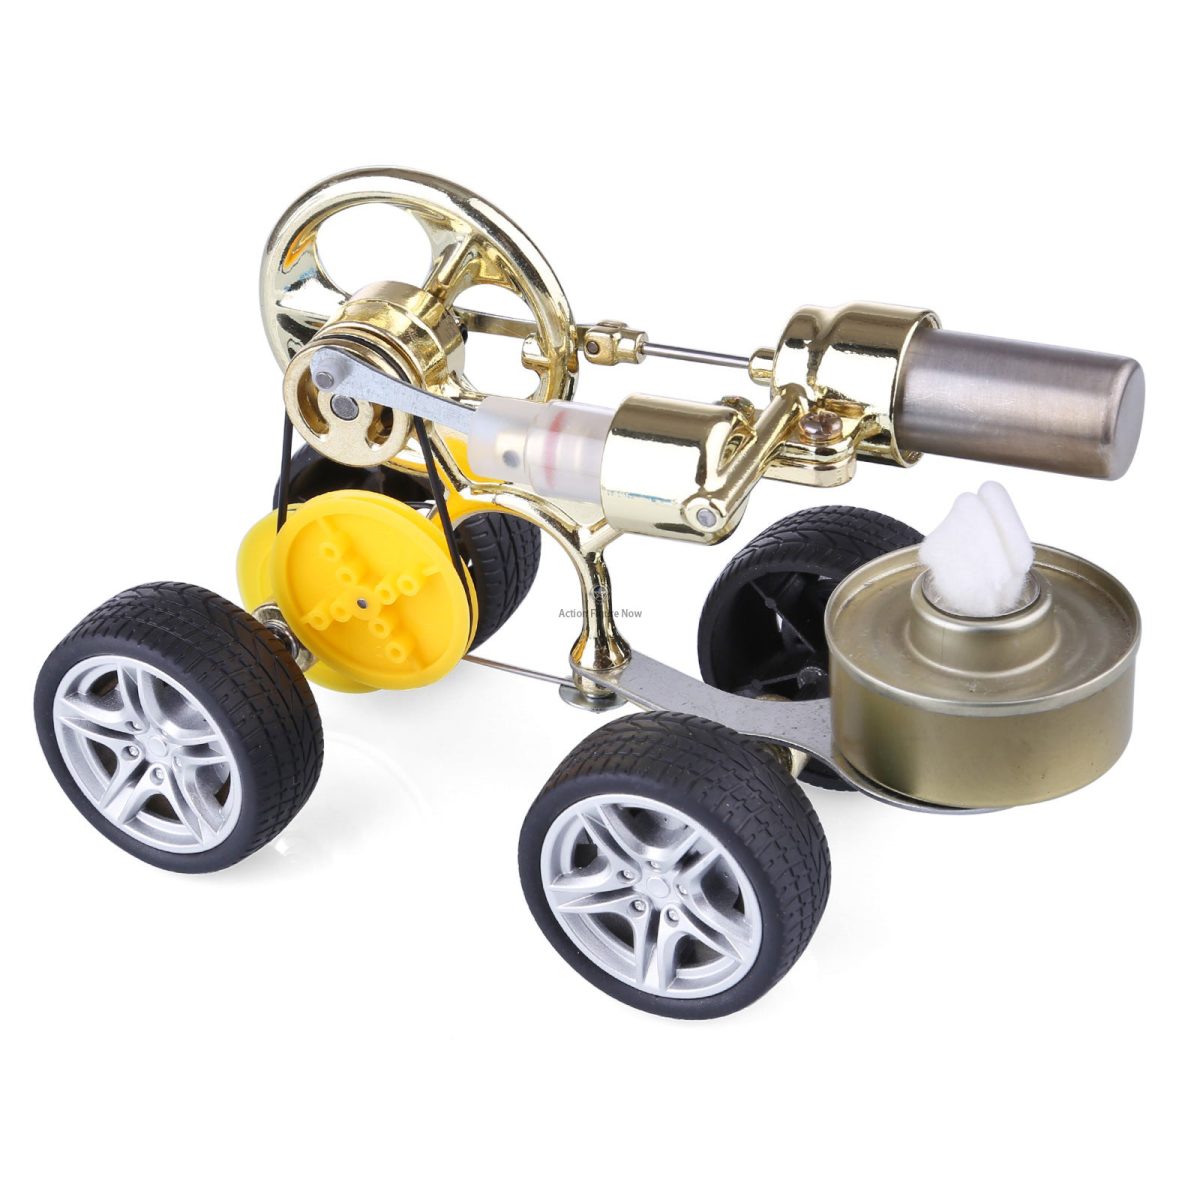 Stirling Engine Vehicle Model with Motor - Educational Science Hobby Kit